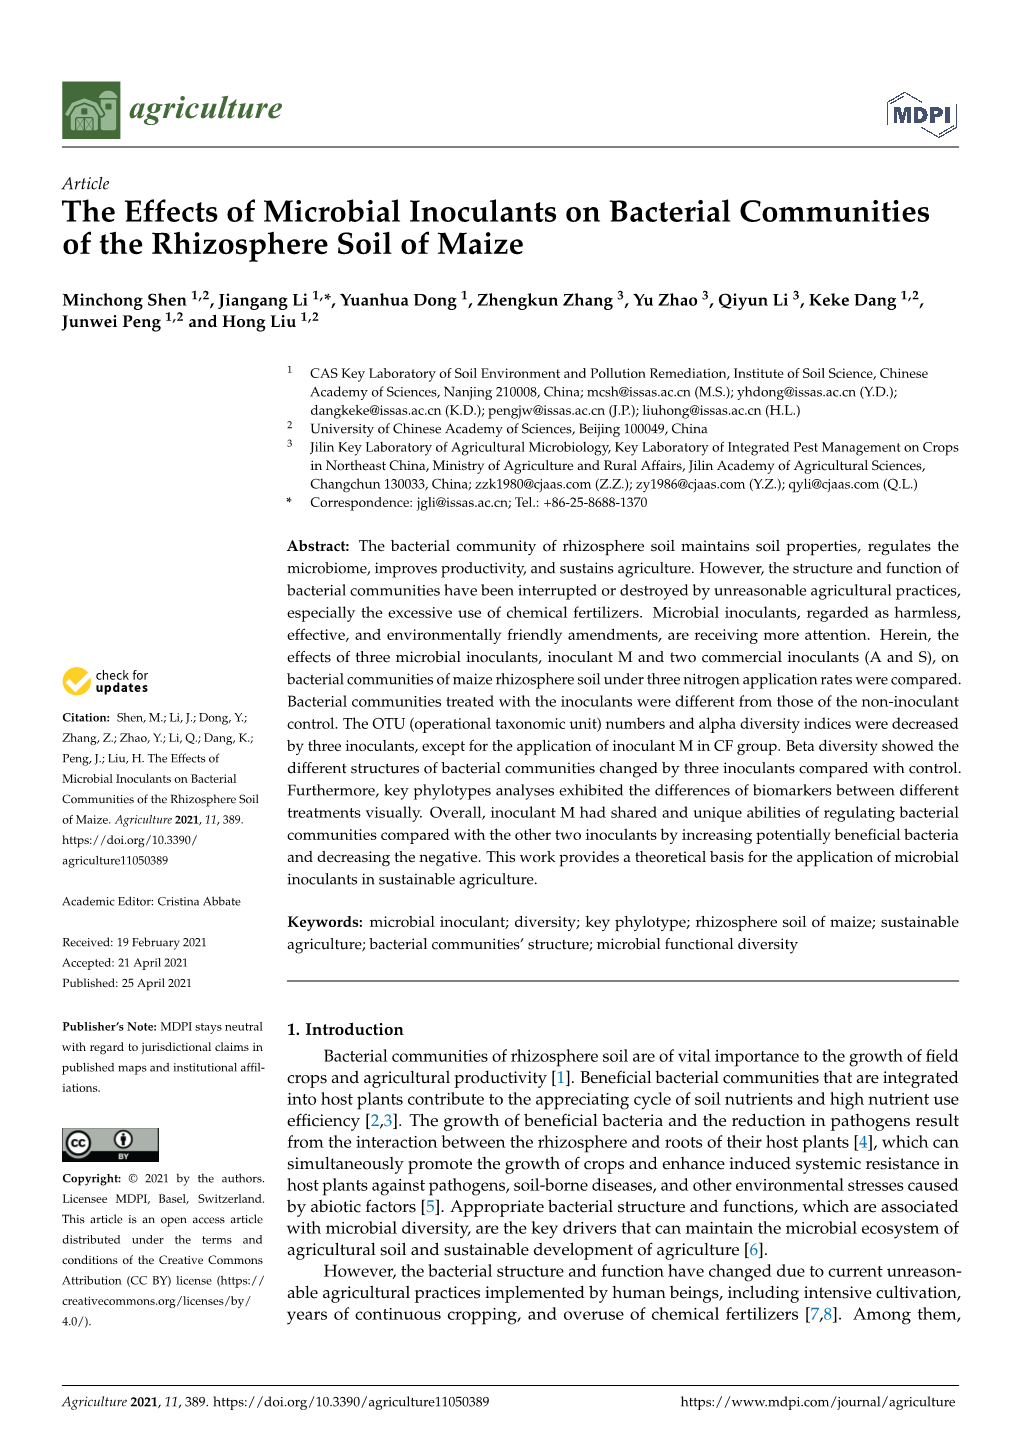 The Effects of Microbial Inoculants on Bacterial Communities of the Rhizosphere Soil of Maize